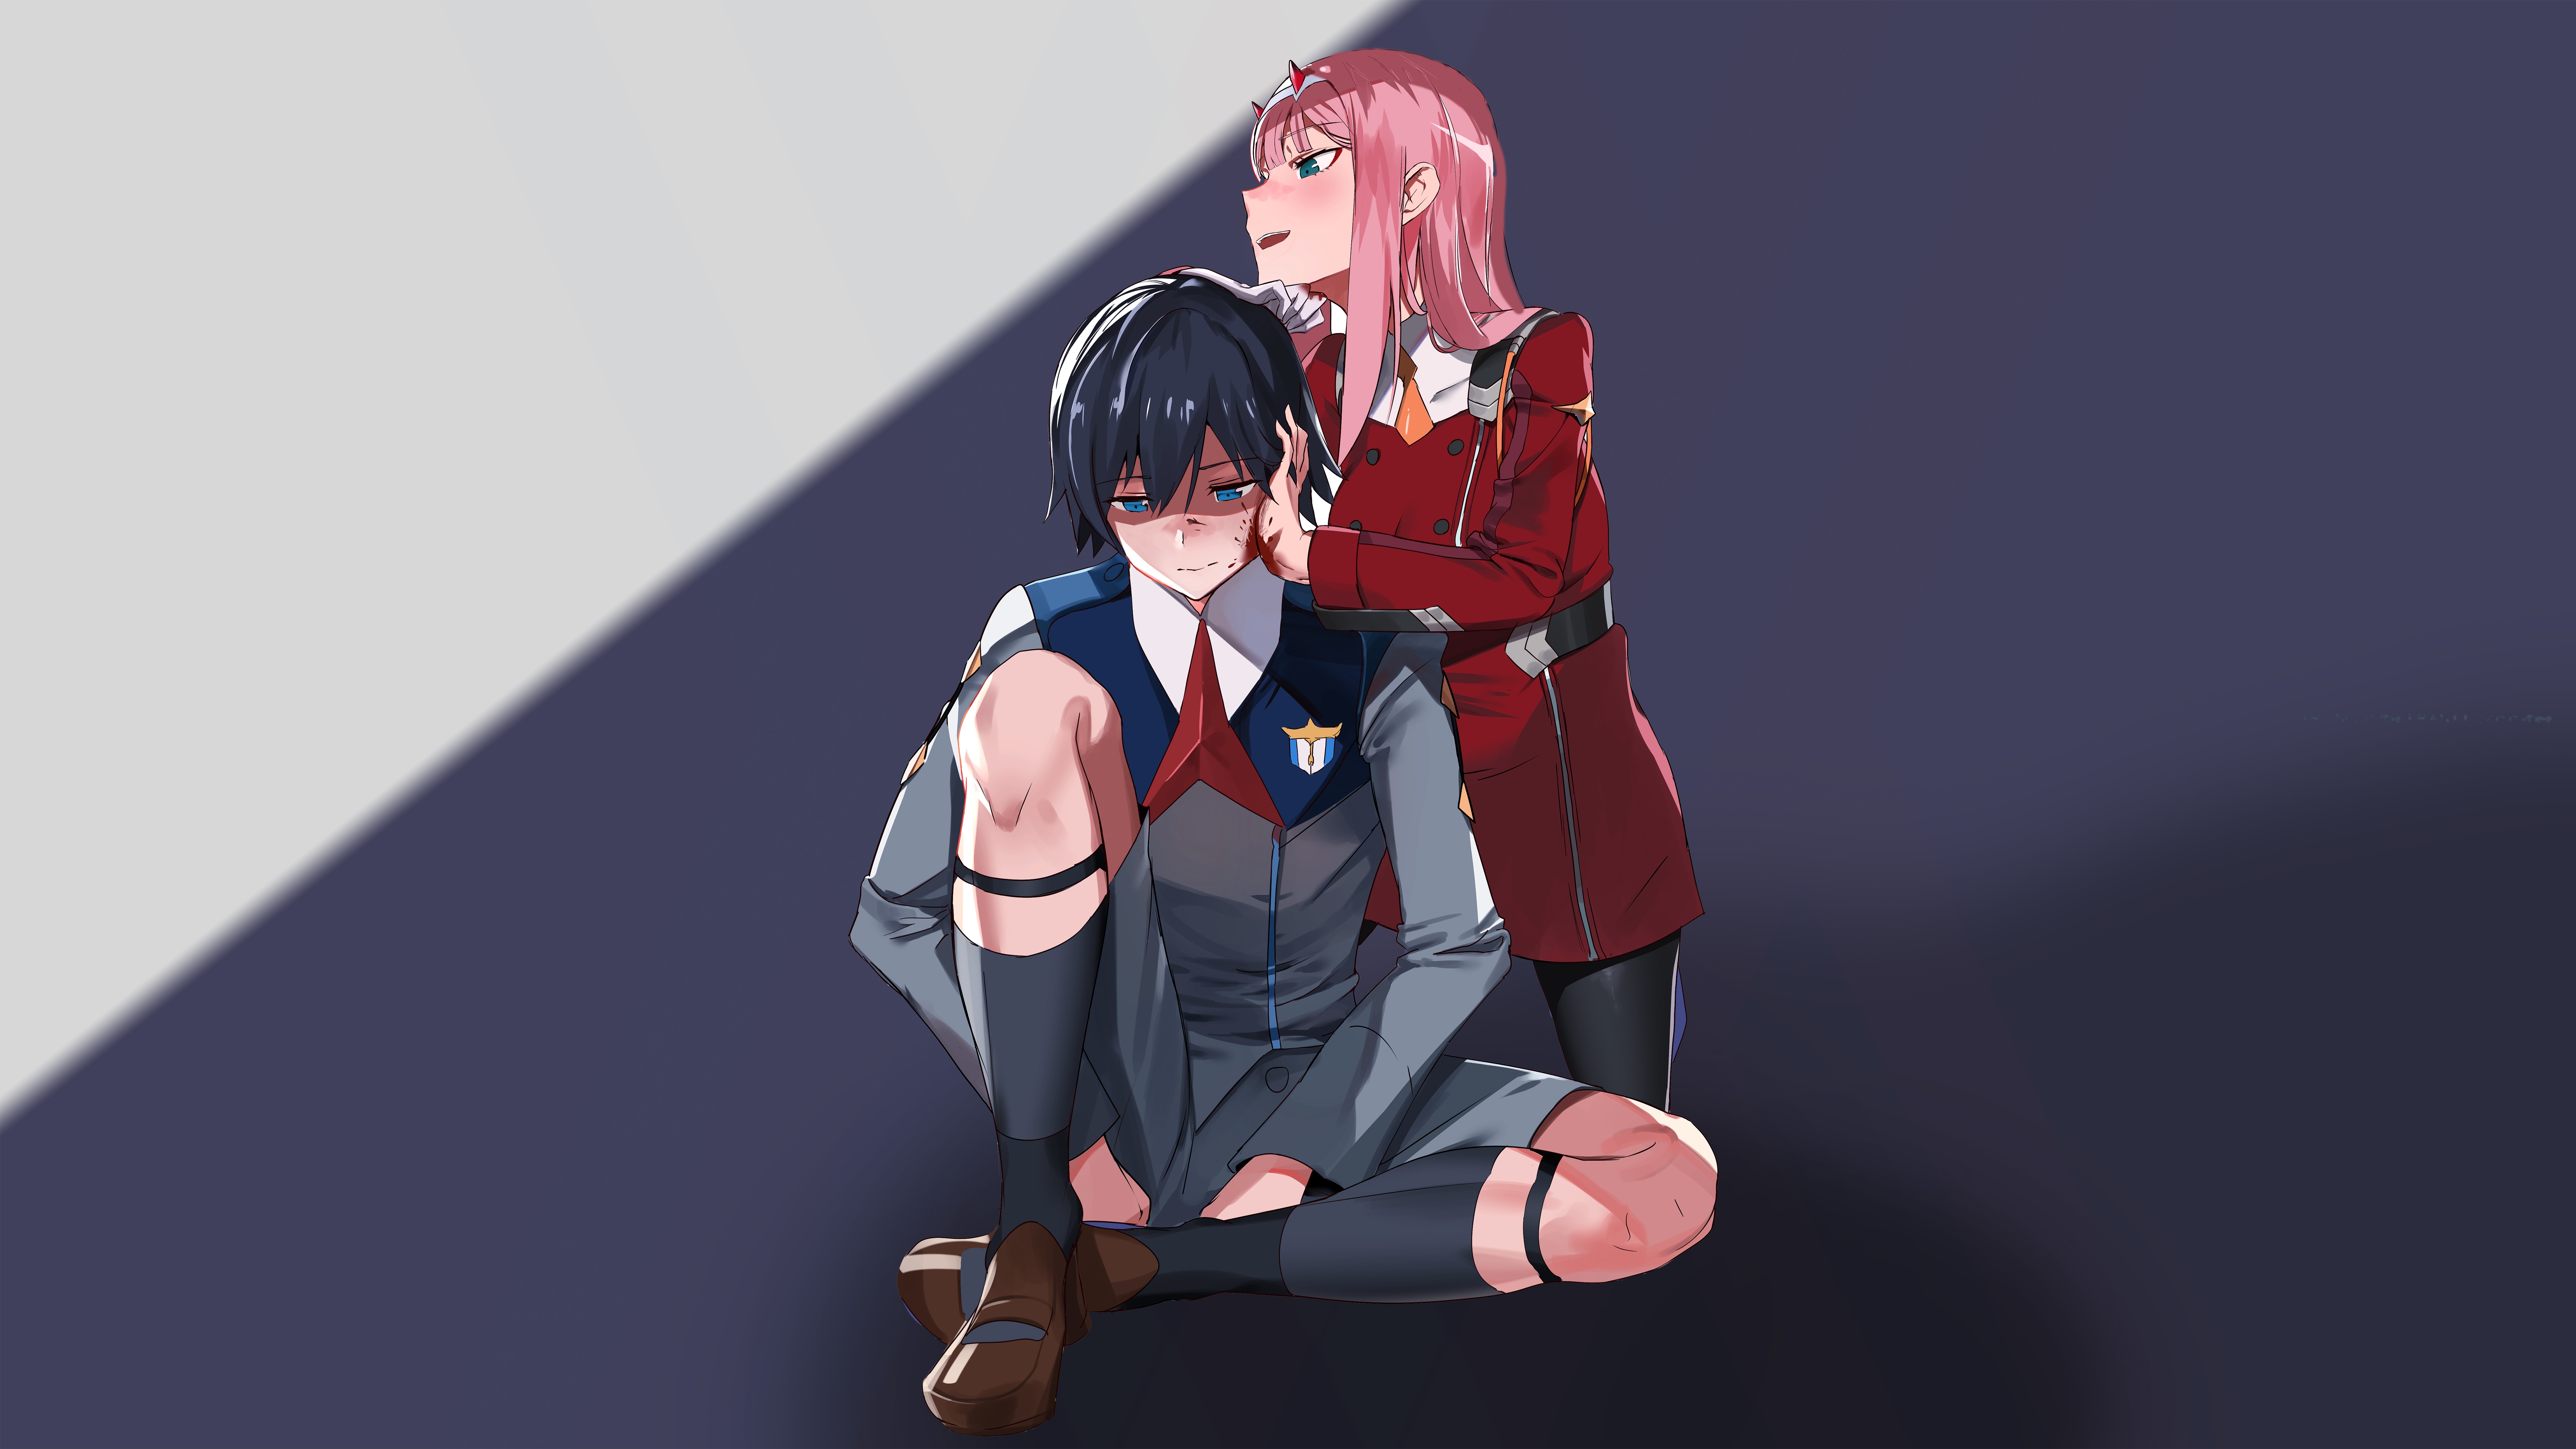 Darling in the FranXX HD Wallpapers and Backgrounds. 